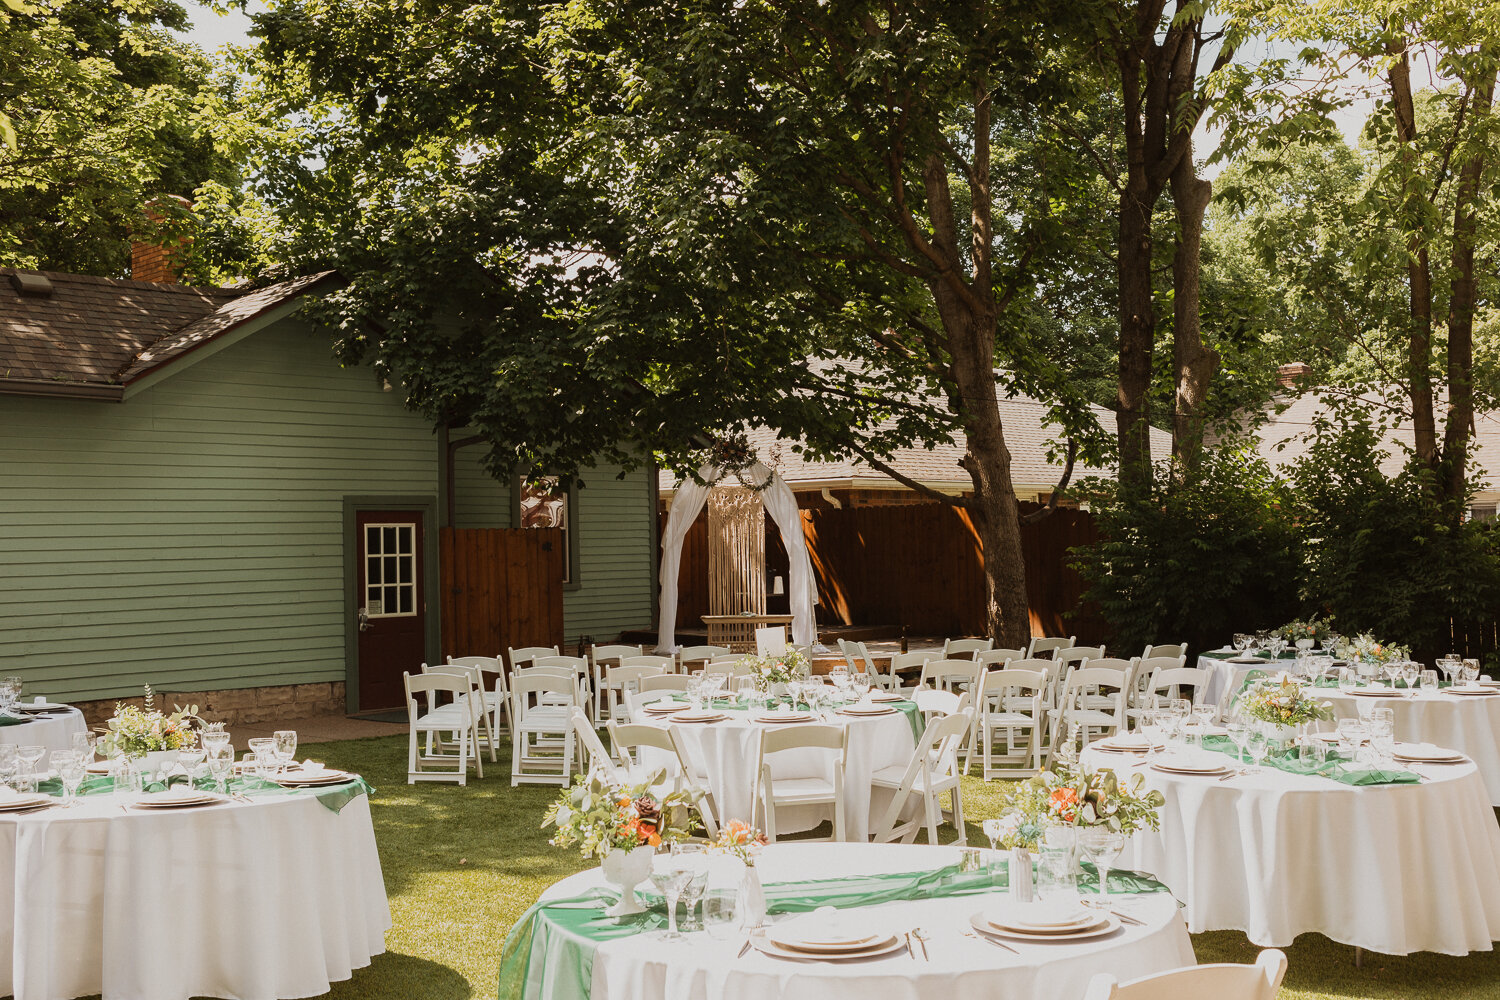 The Best Wedding Venues in Central Indiana for a Small Intimate Wedding